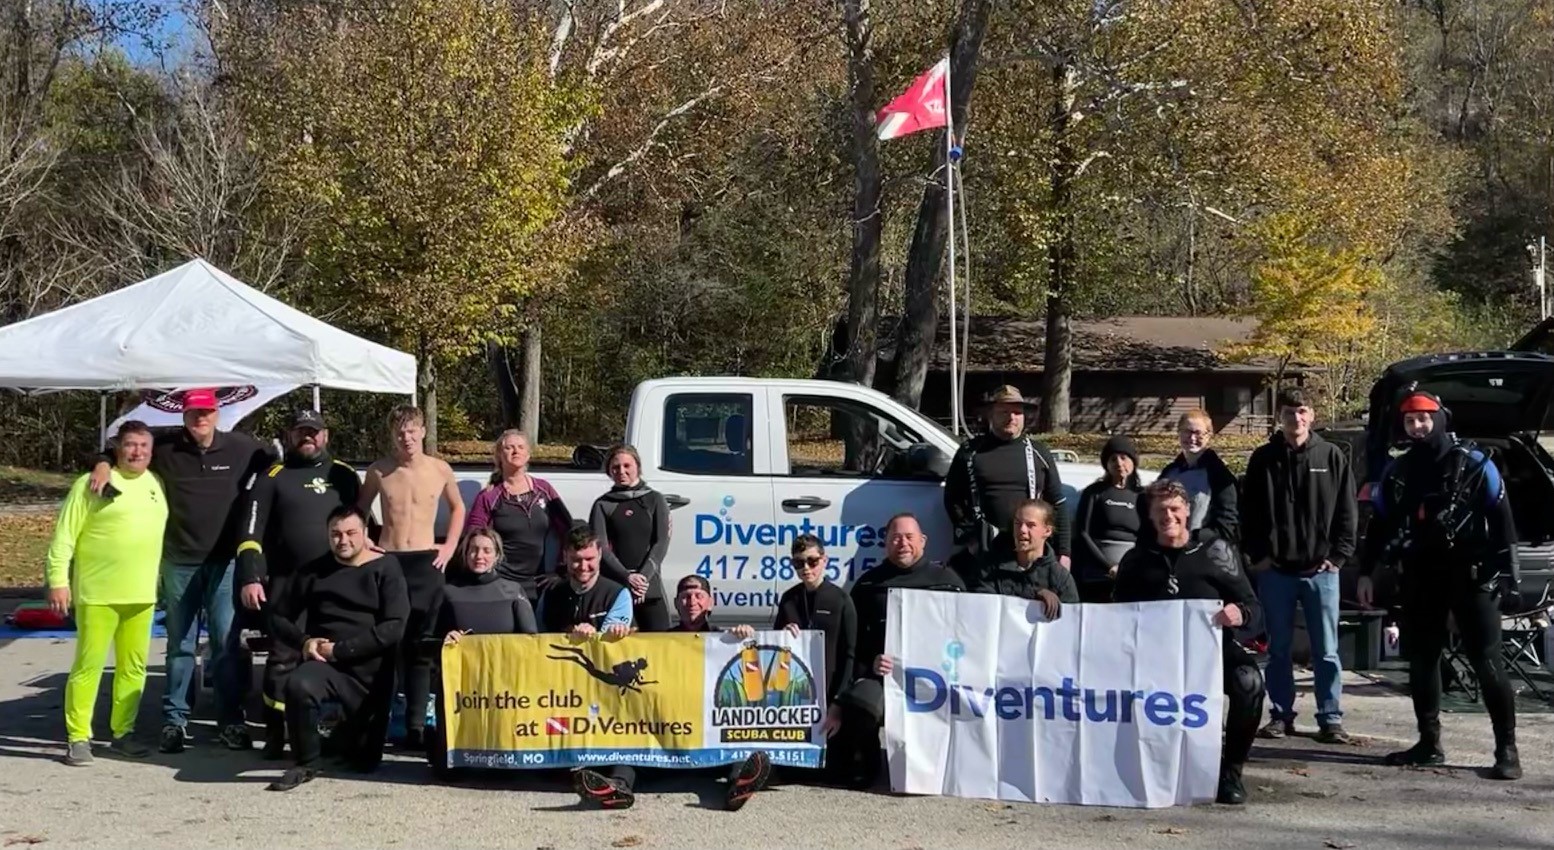 Members of the Diventures diving group pose in front of their white pickup truck and hold up banners for their organization